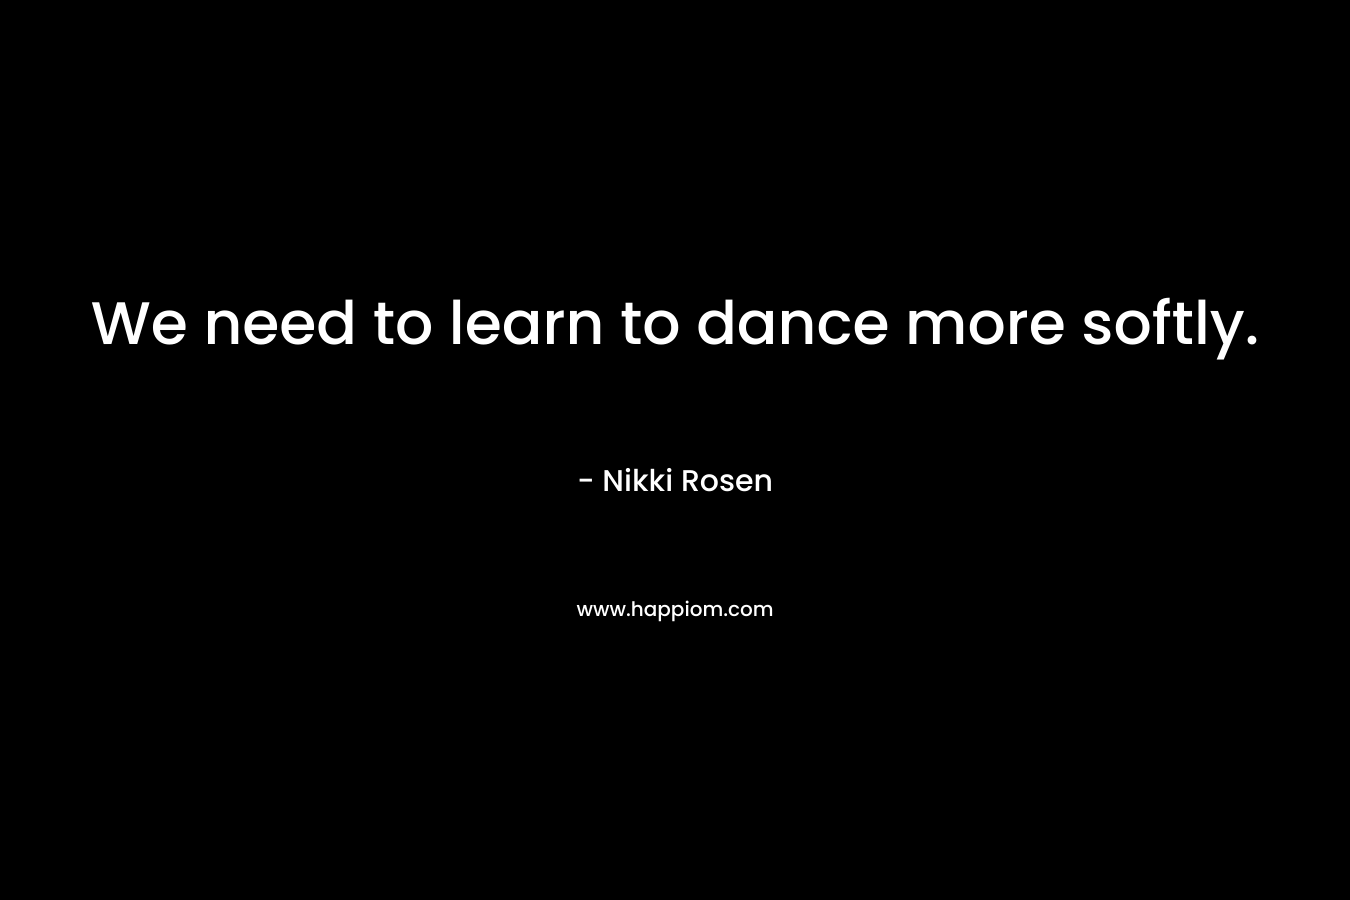 We need to learn to dance more softly. – Nikki Rosen